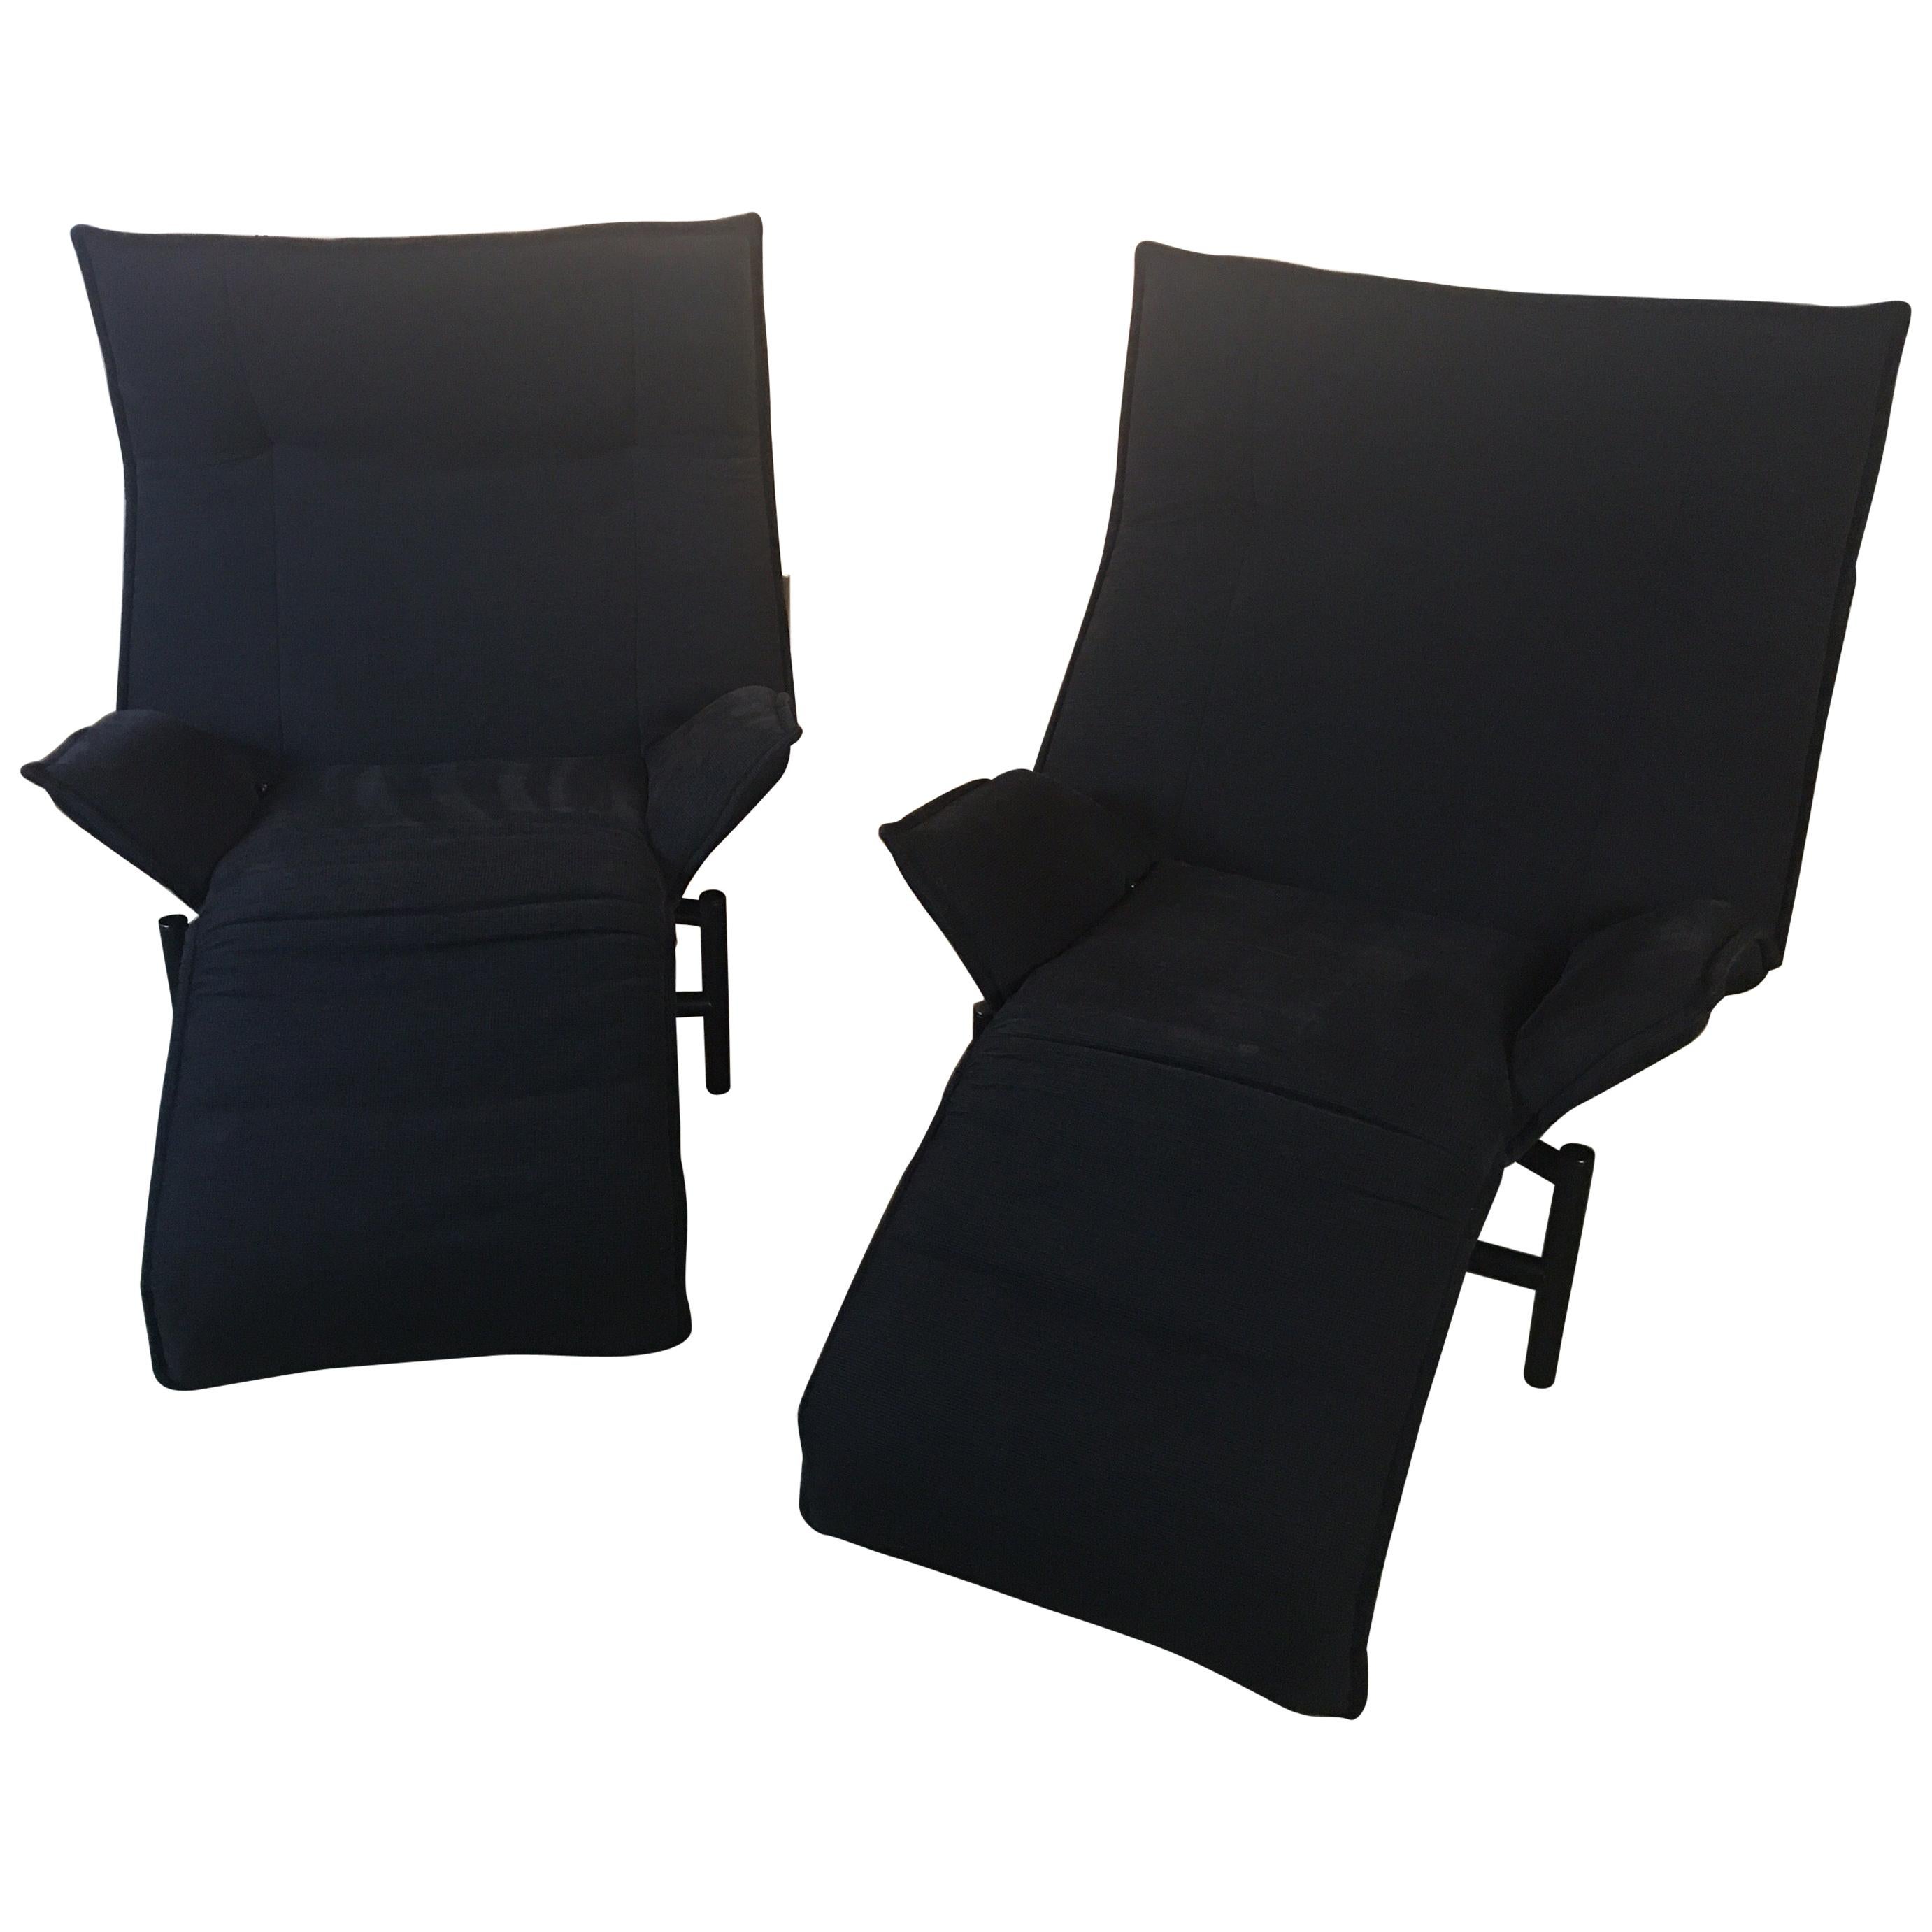 Pair of Cassina Veranda Adjustable Lounge Chairs by Vico Magistretti